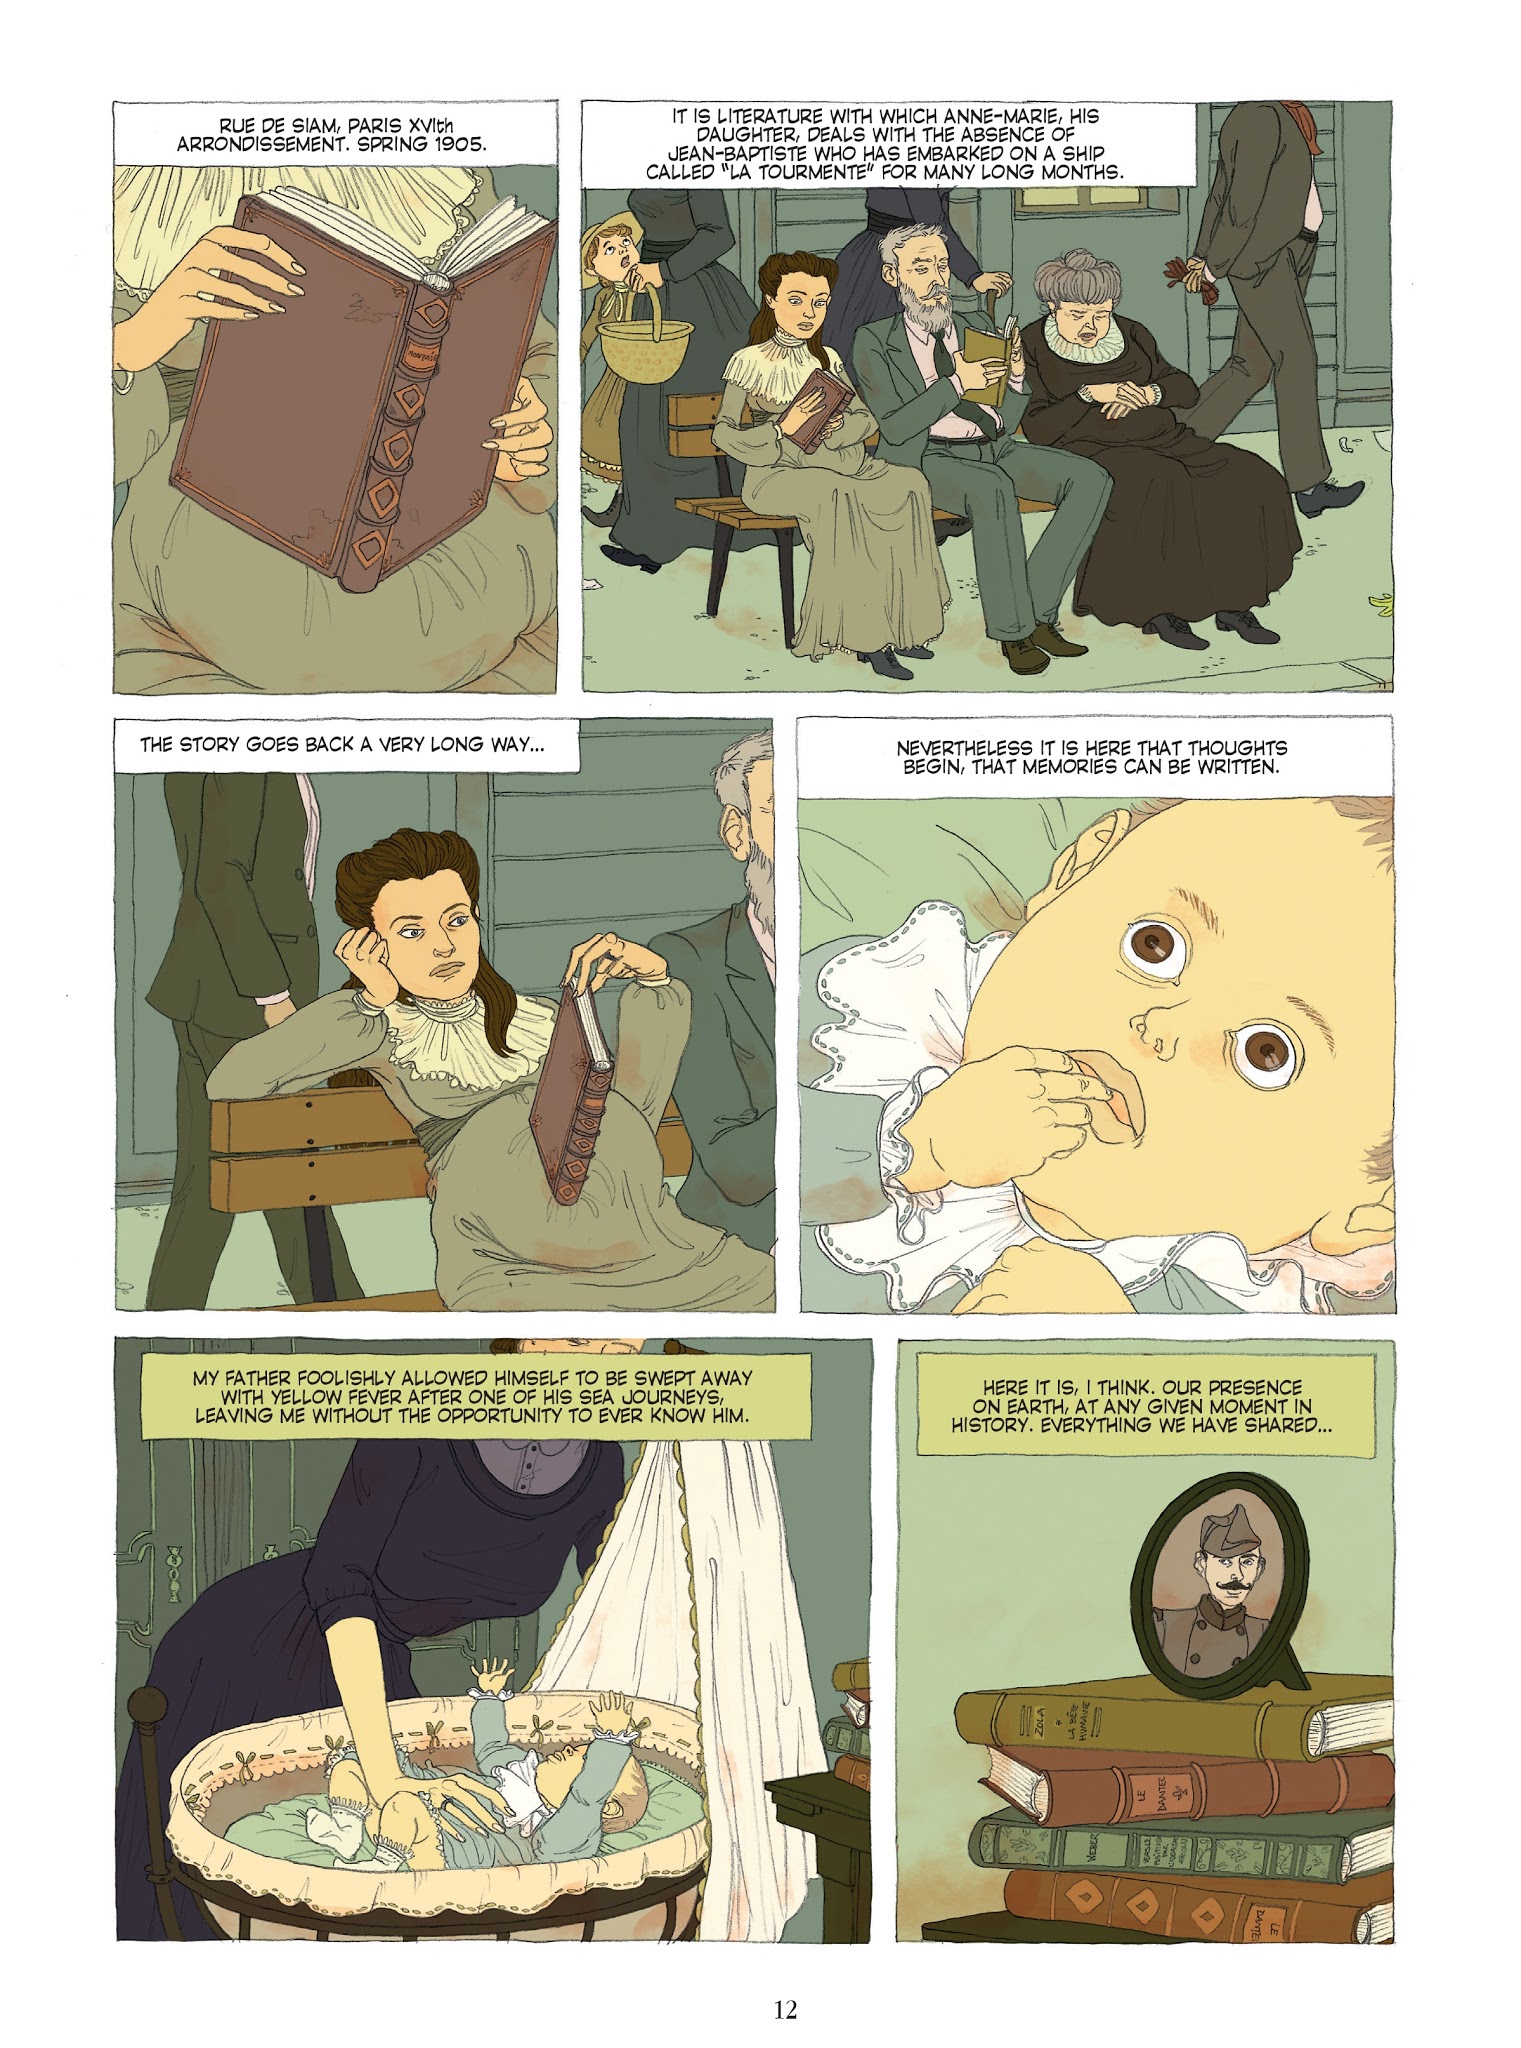 Read online Sartre comic -  Issue # TPB - 9